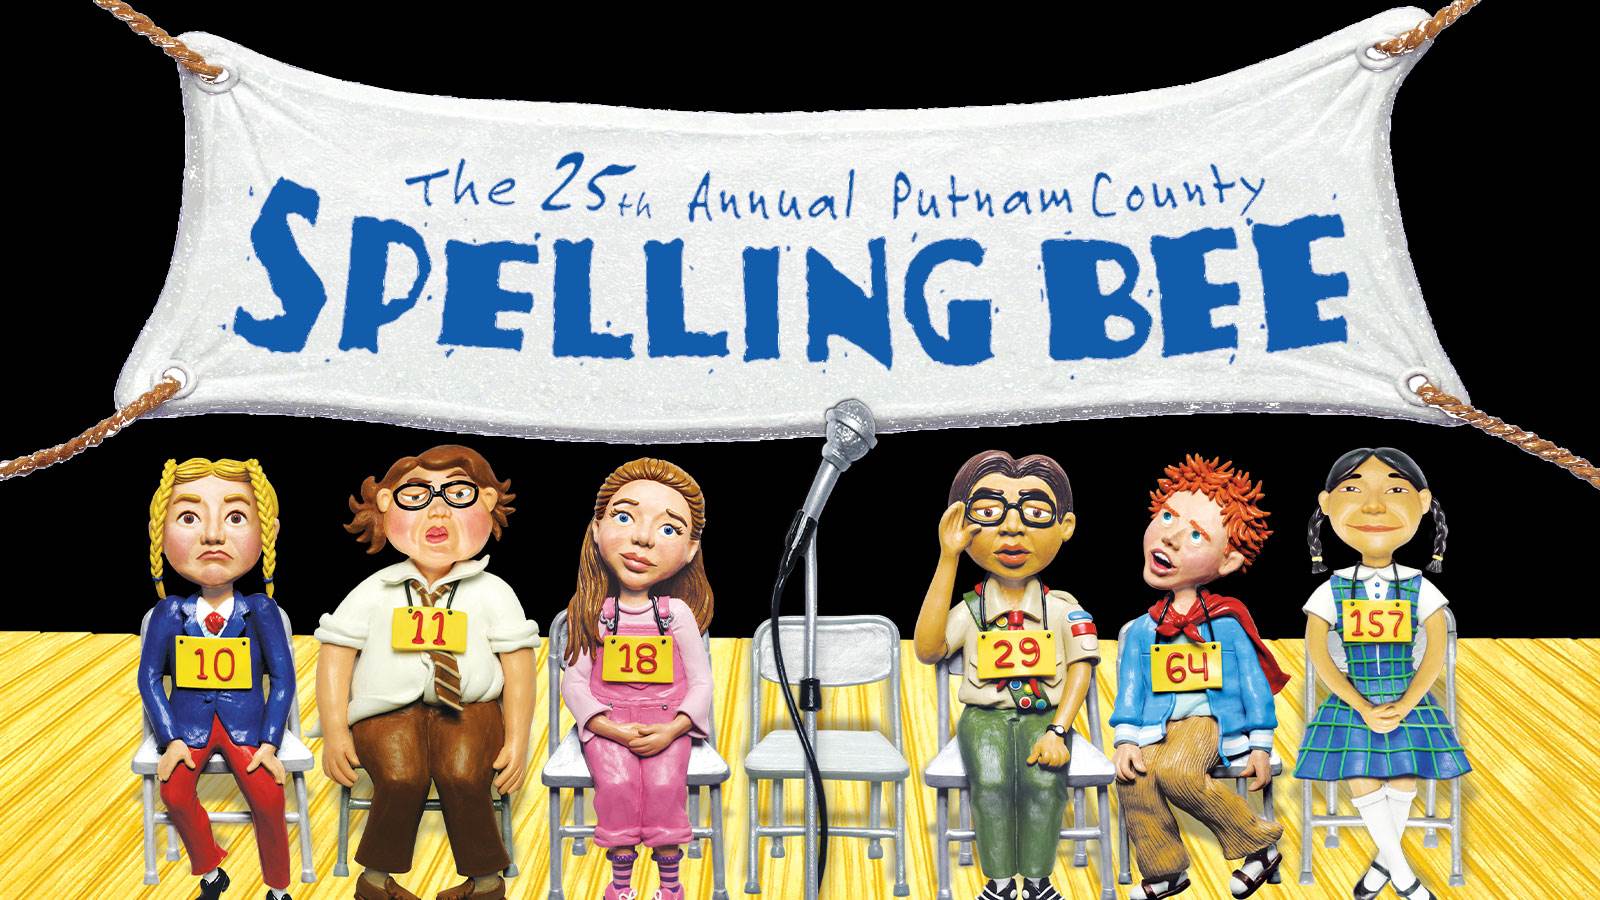 A white handmade banner is hung using rope at the top of the photo. It says "The 25th Annual Putnam County Spelling Bee". Below the banner is six children sitting on metal folding chairs and numbers pinned to their shirt. In front of them is a microphone. 